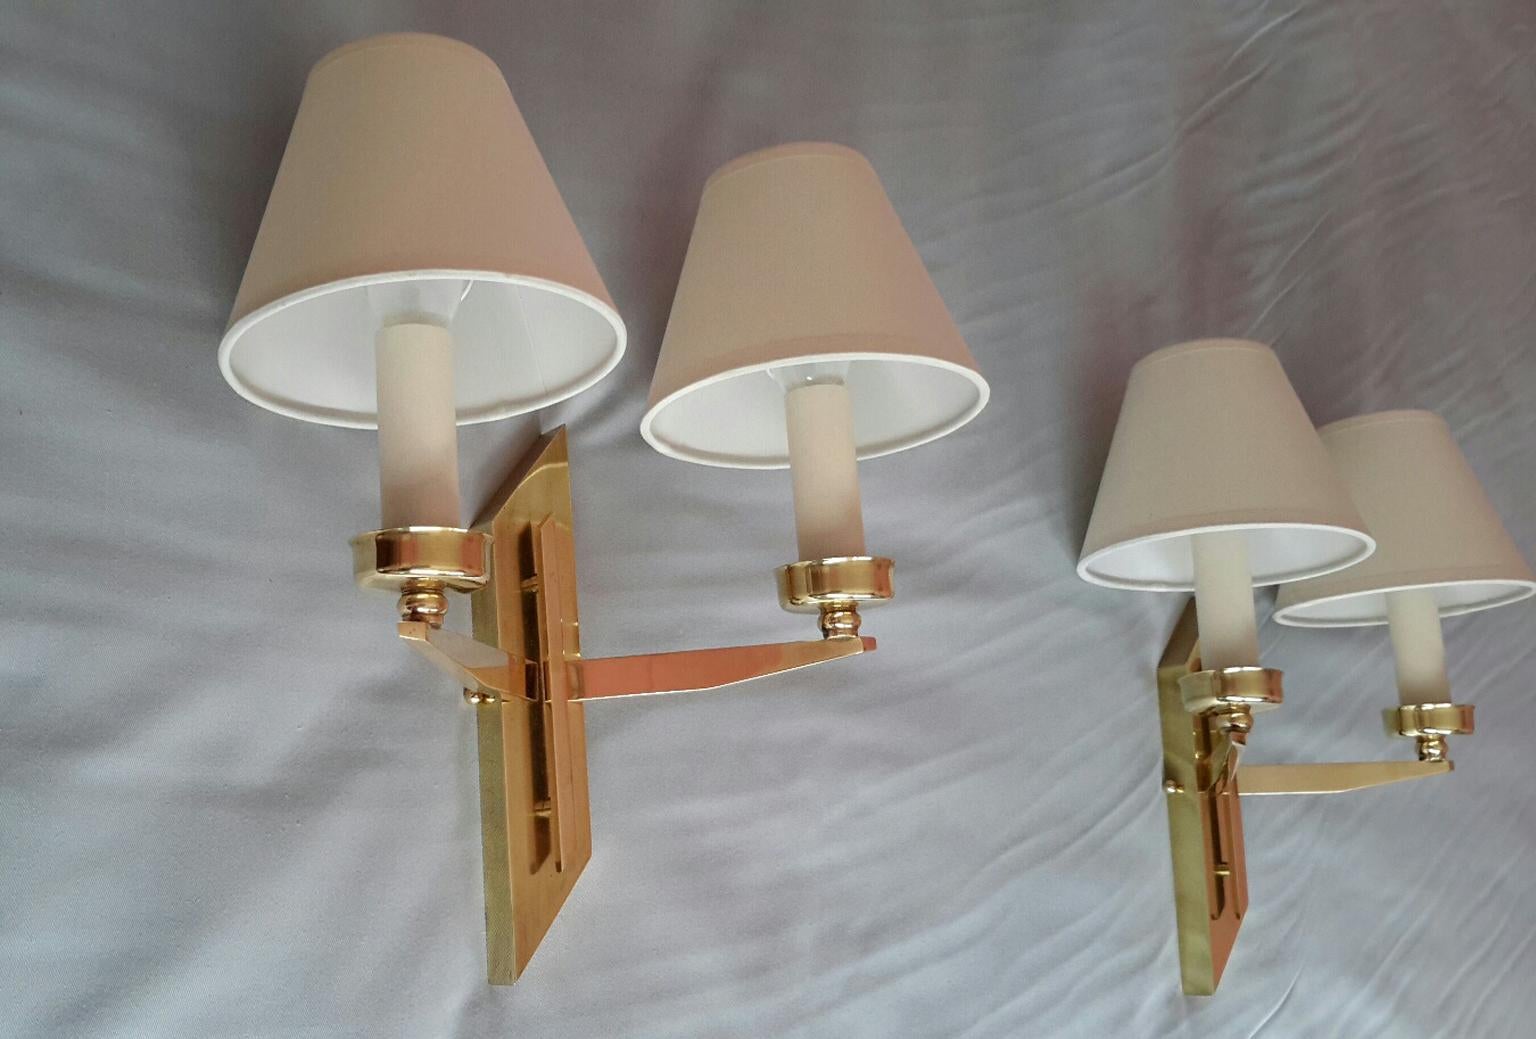 Pair of French Mid-Century Modern Sconces by Maison Lunel, 1950 For Sale 2